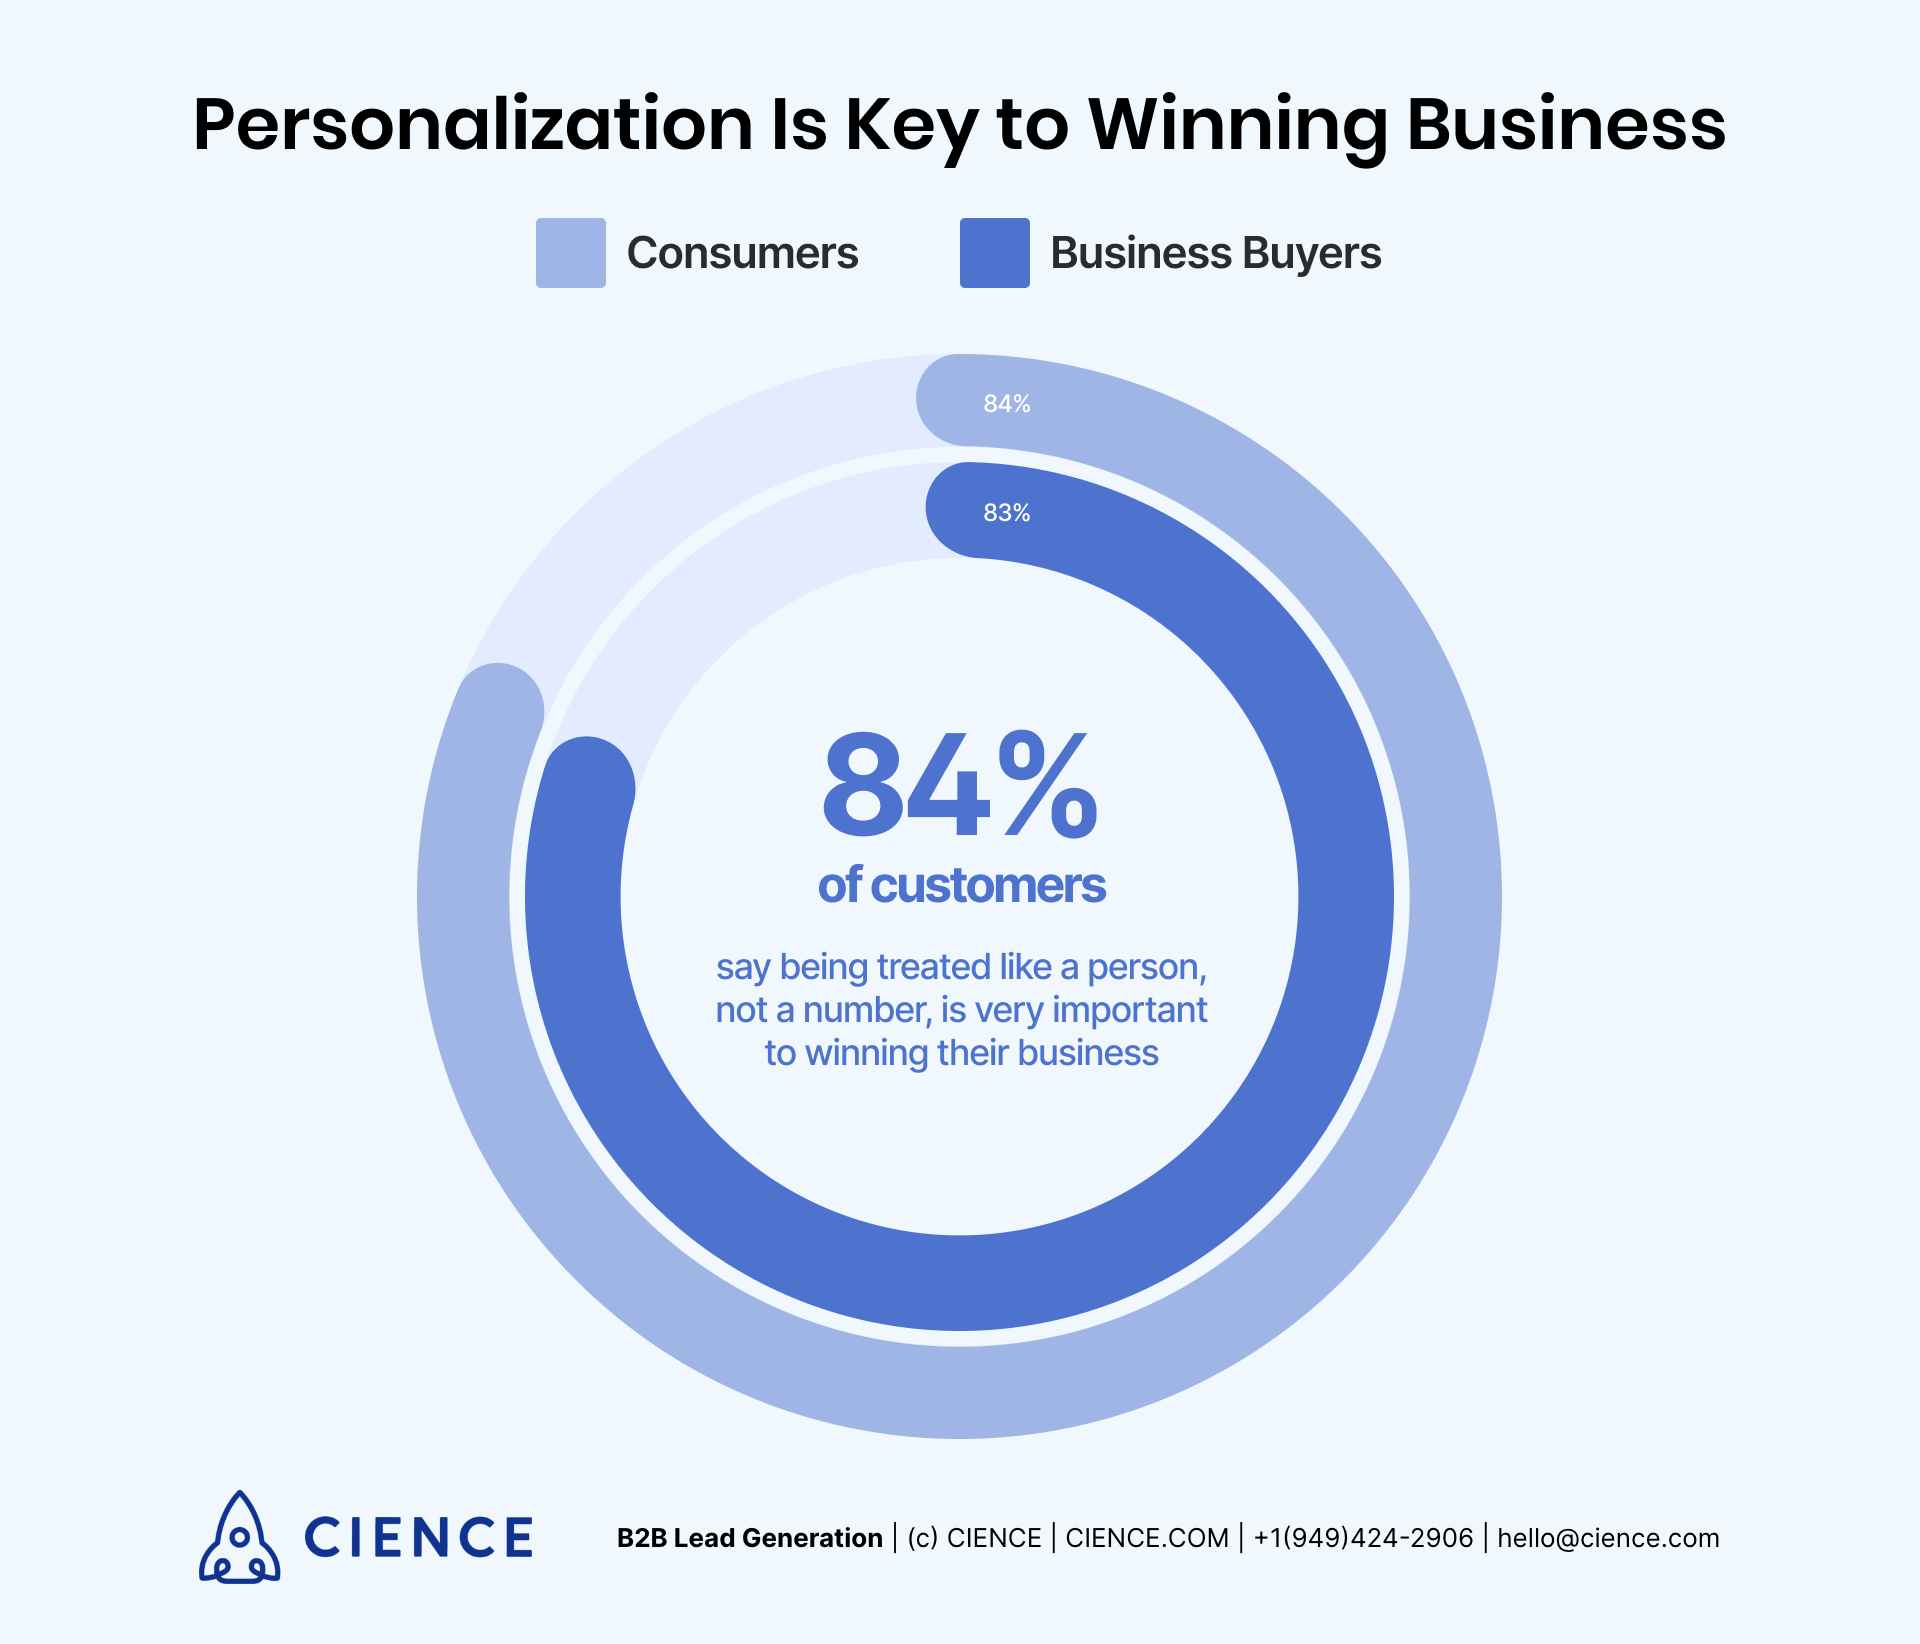 Personalization is a key to winning business